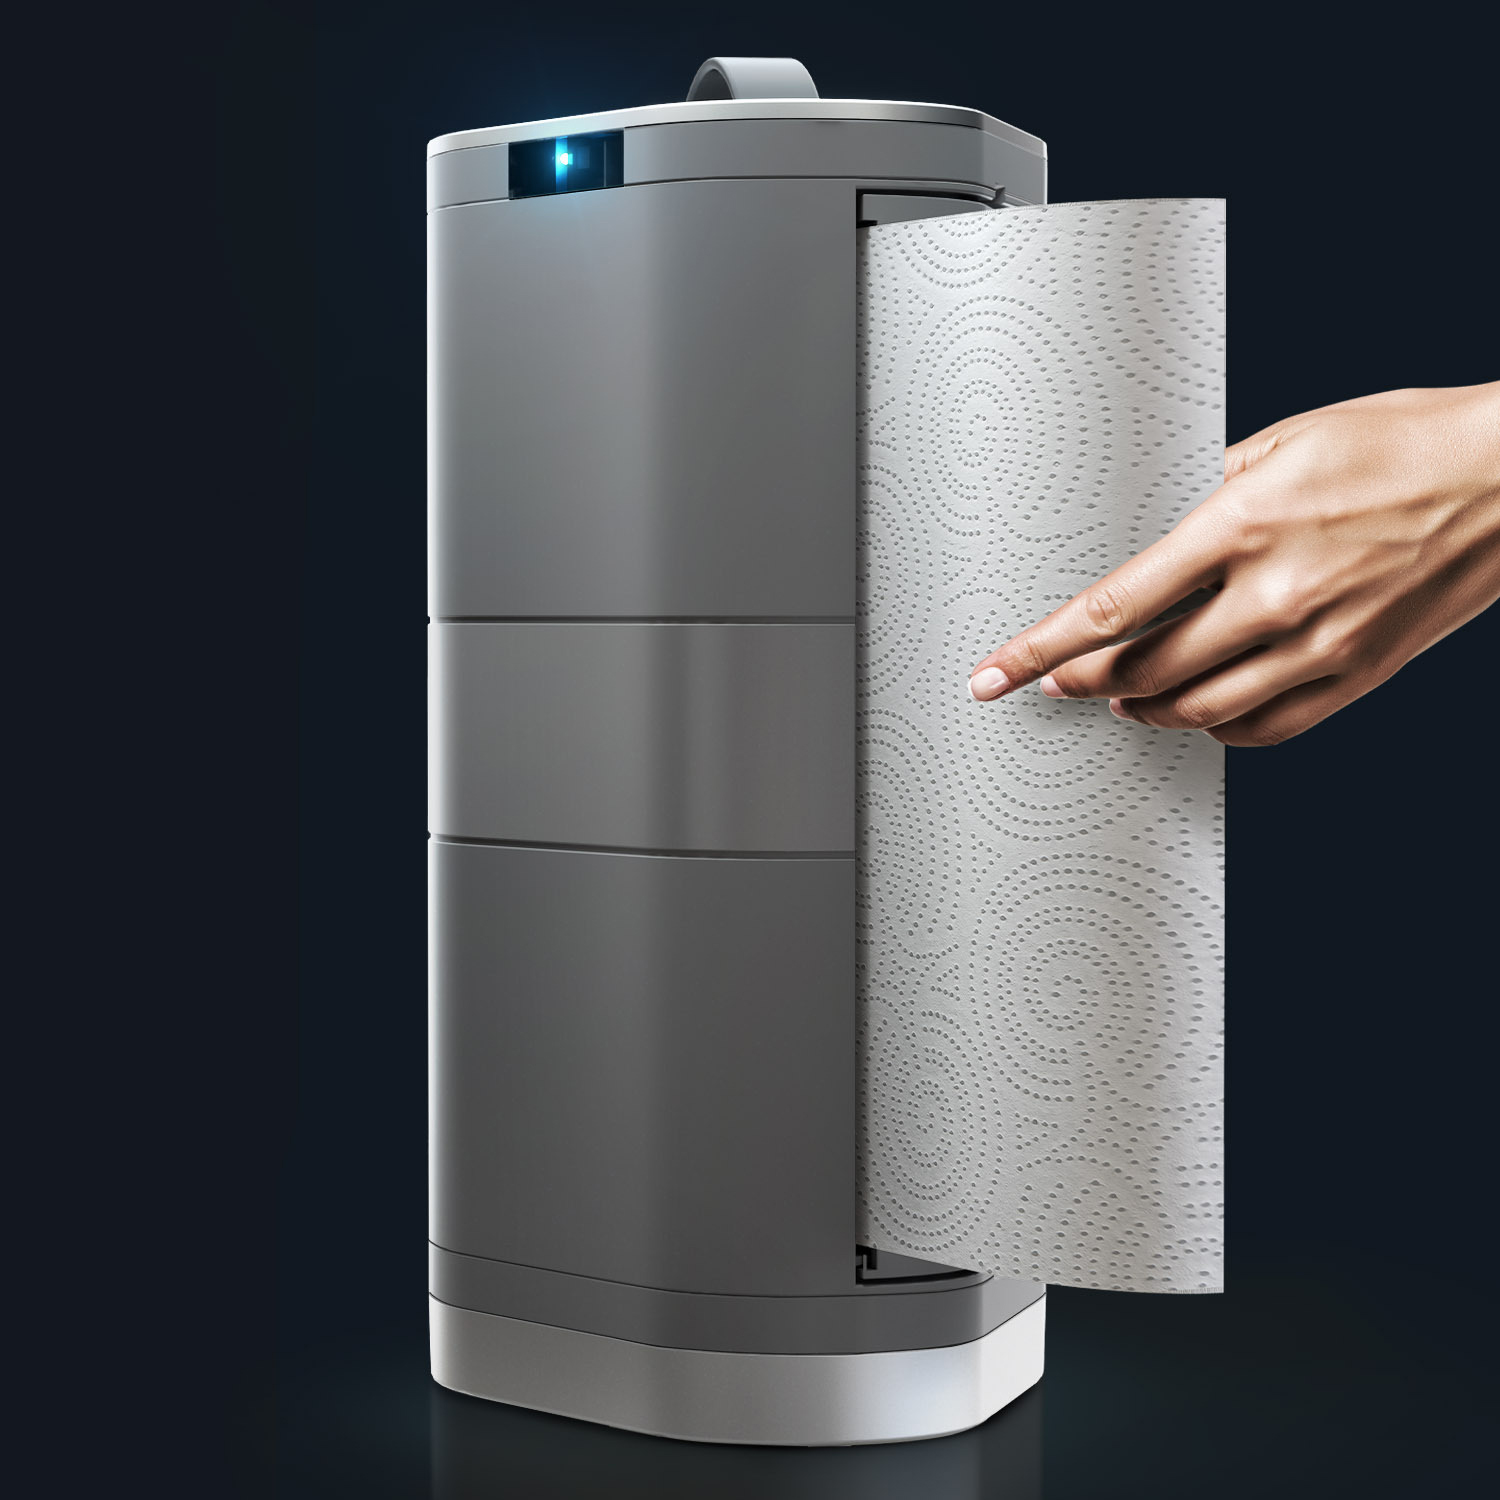 Because messes can happen anywhere, this countertop Innovia® Touchless Paper Towel Dispenser provides convenience wherever and whenever you need a helping hand.